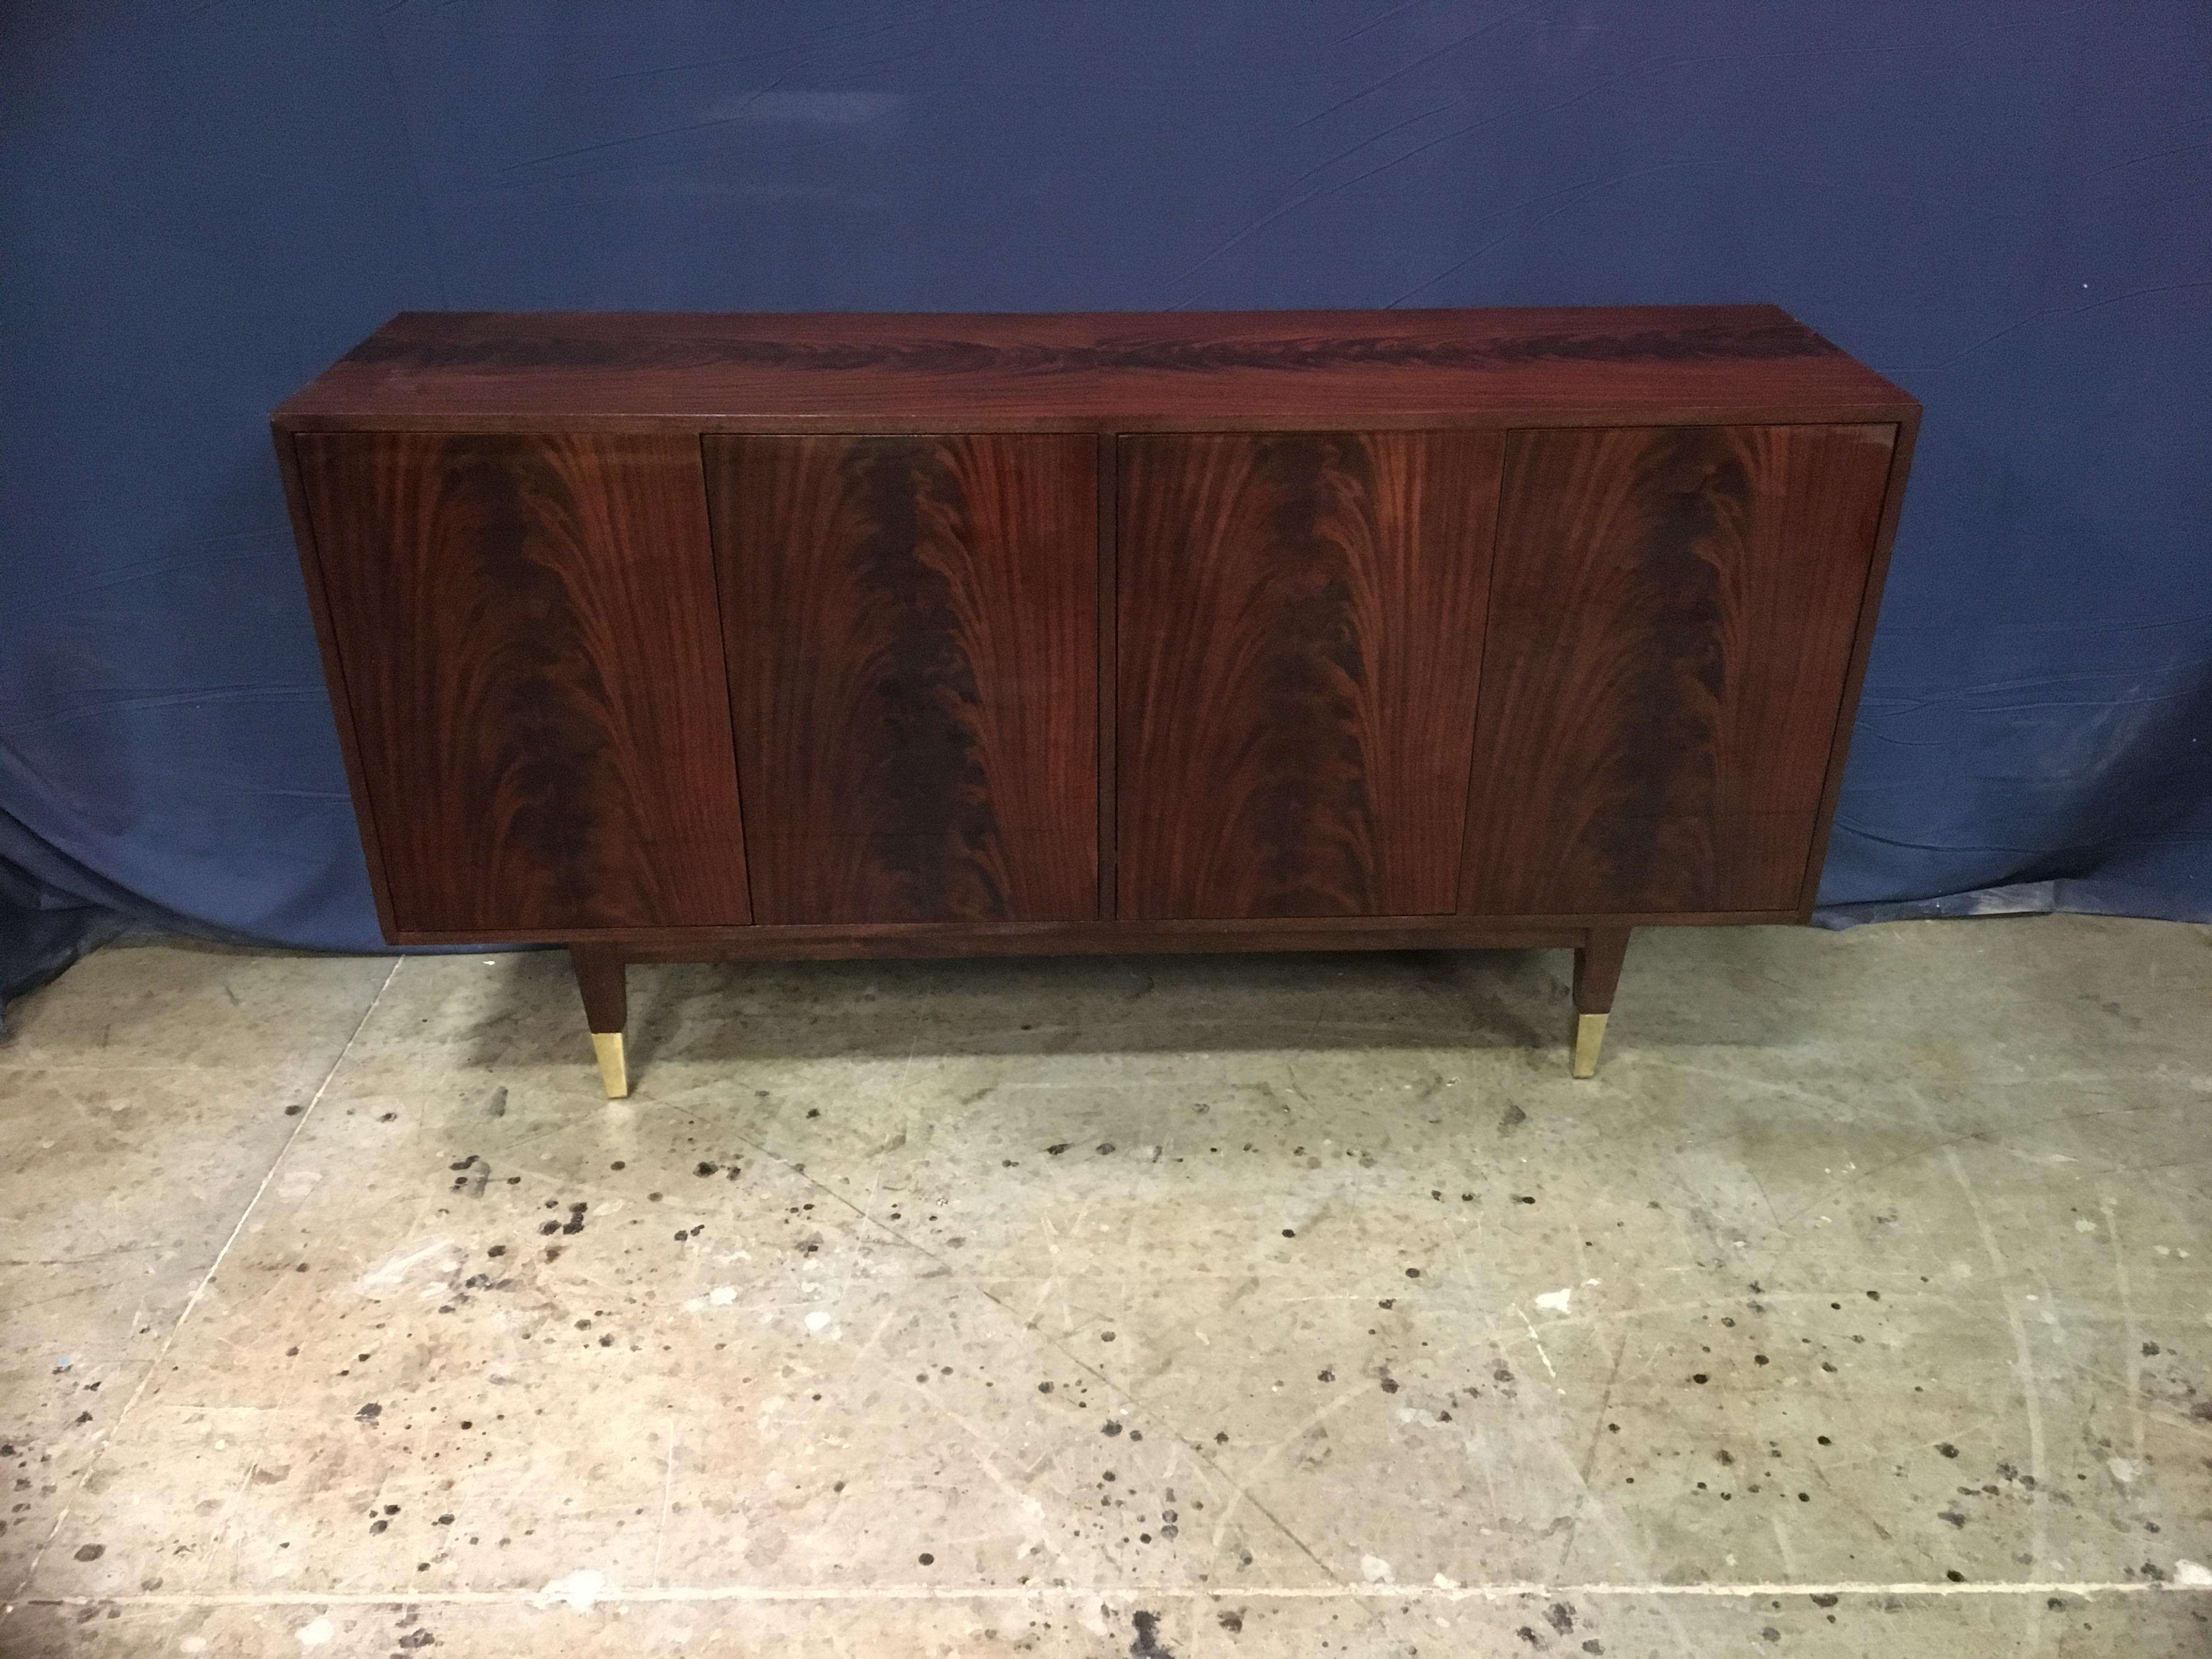 This is made-to-order midcentury style mahogany four door sideboard/credenza made in the Leighton Hall shop. It features four doors with swirly crotch mahogany and a top and sides of matching swirly crotch mahogany. It has square tapered legs which